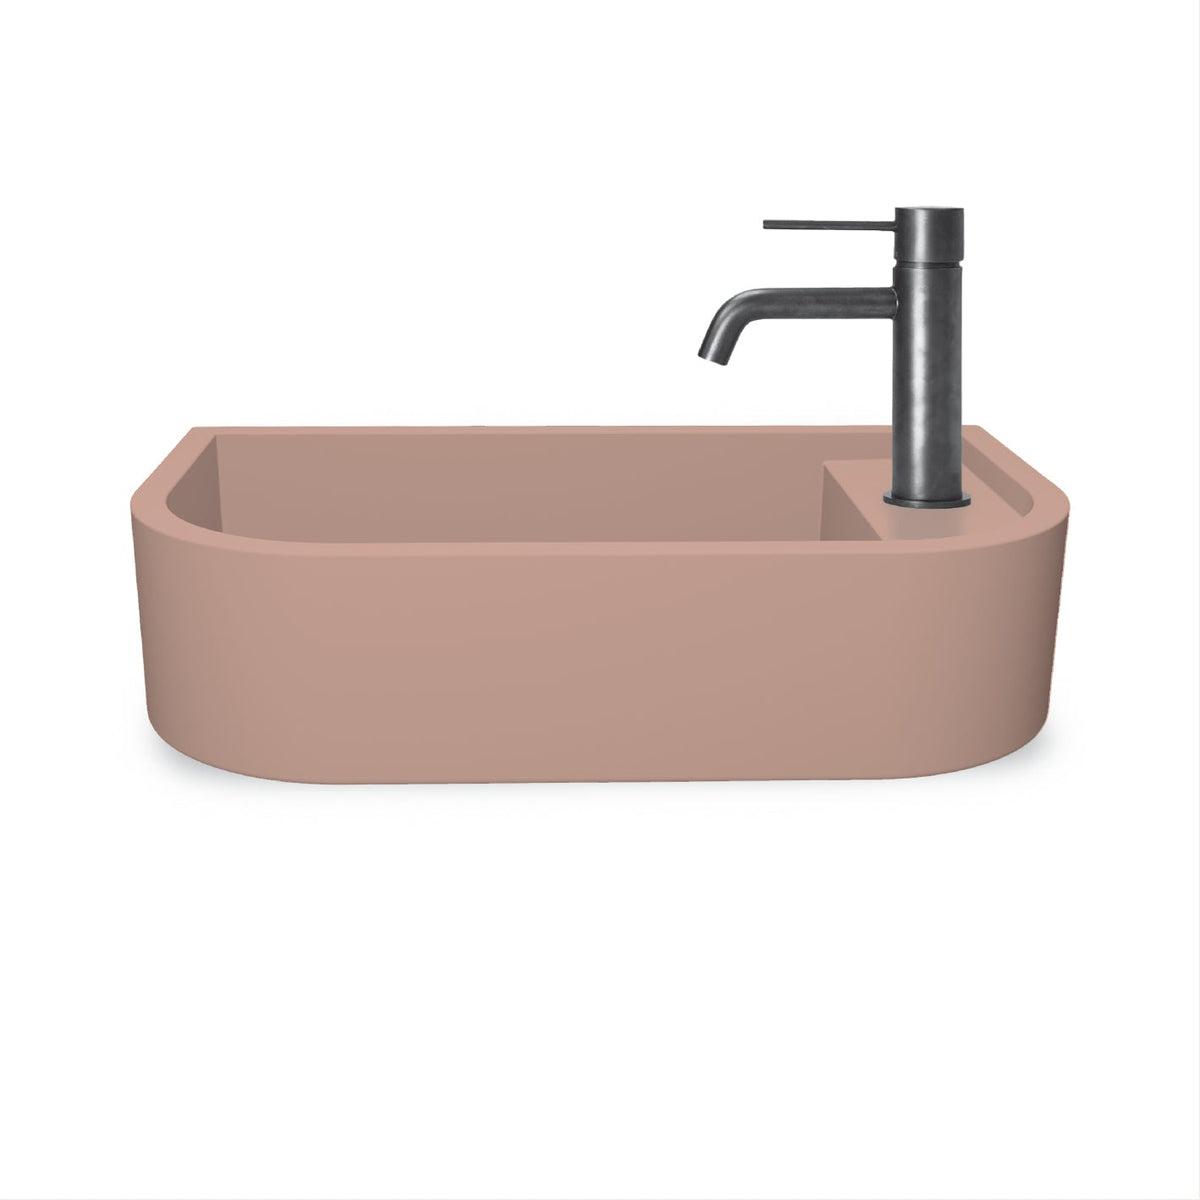 Loop 02 Basin - Overflow - Wall Hung (Blush Pink,Tap Hole,Brass)